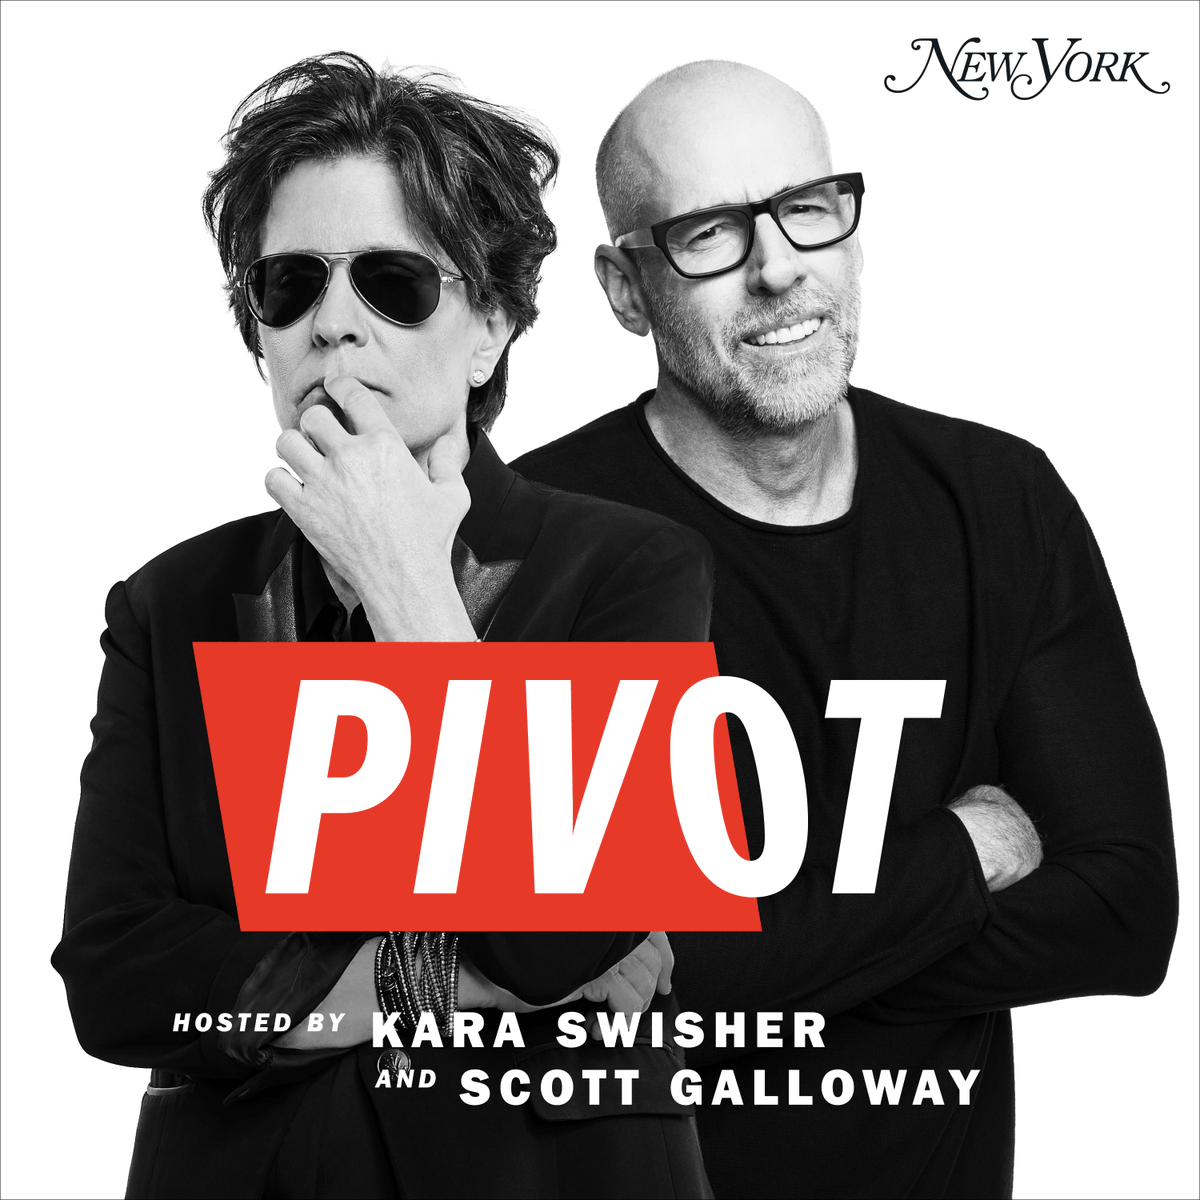 It's not too late to help Pivot win @TheWebbyAwards for Best Business Podcast! Vote here: vote.webbyawards.com/PublicVoting#/…